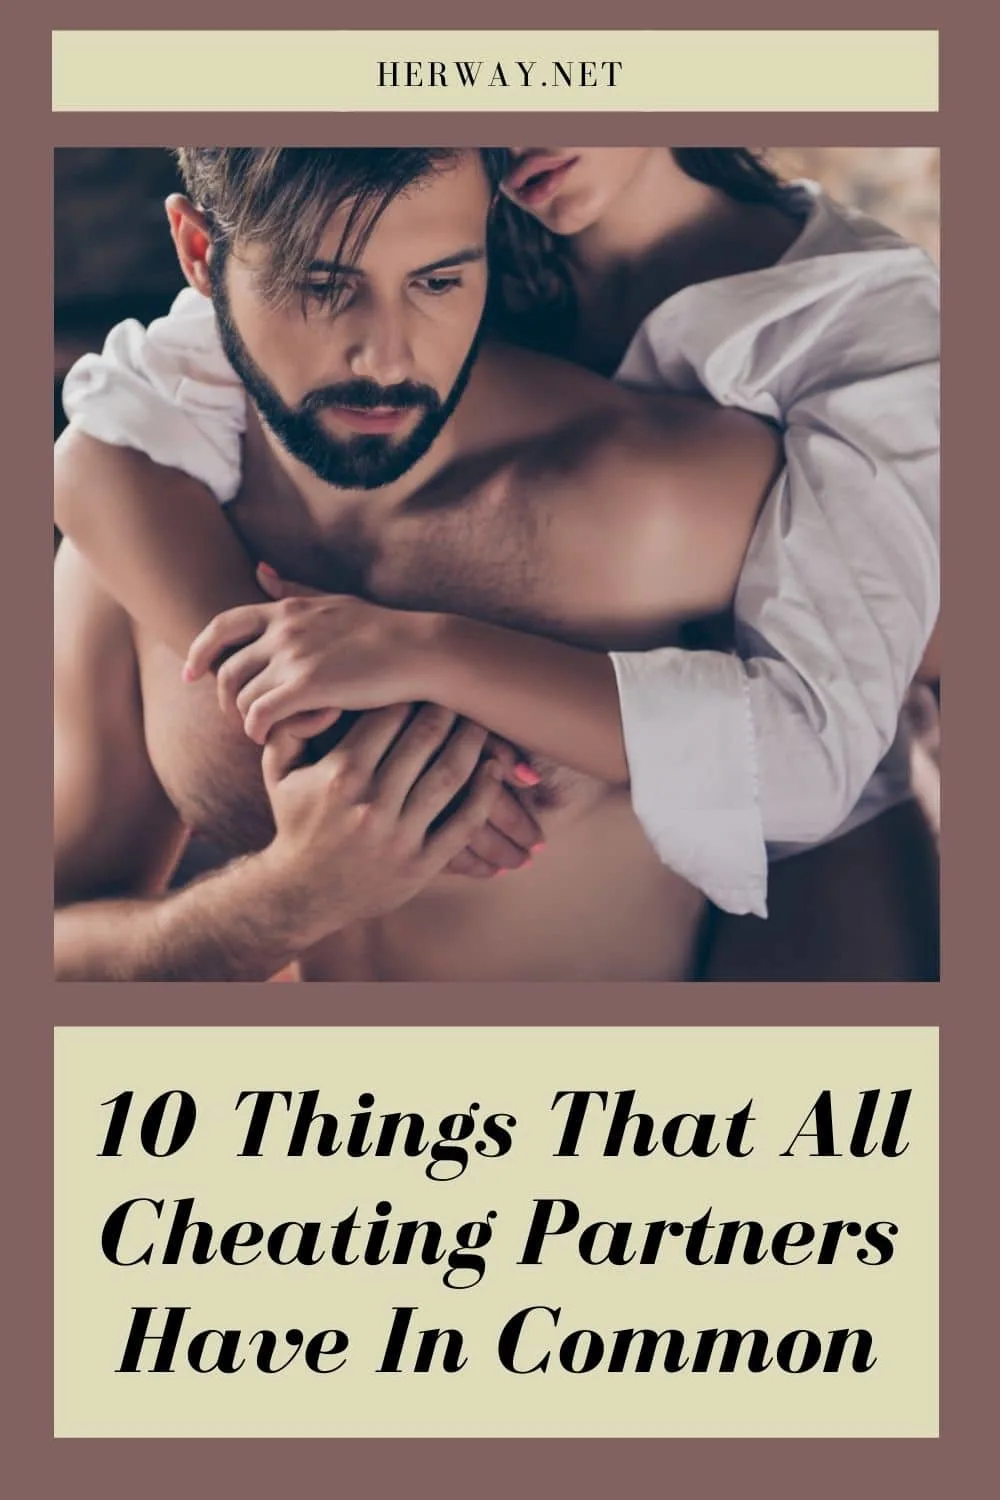 10 Things That All Cheating Partners Have In Common